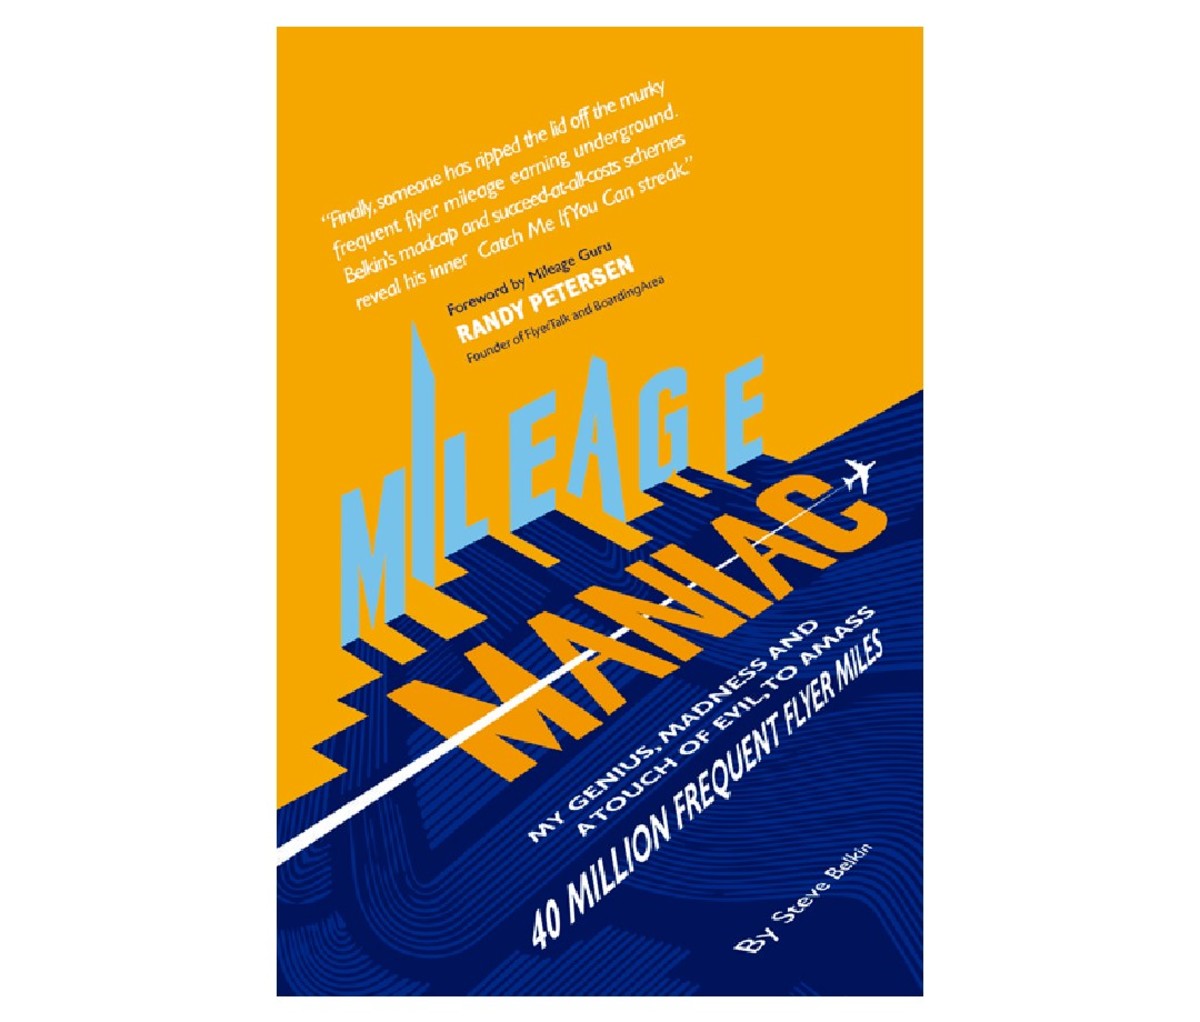 The book cover for Mileage Maniac: My Genius, Madness And A Touch Of Evil To Amass 40 Million Frequent Flyer Miles by Steve Belkin  